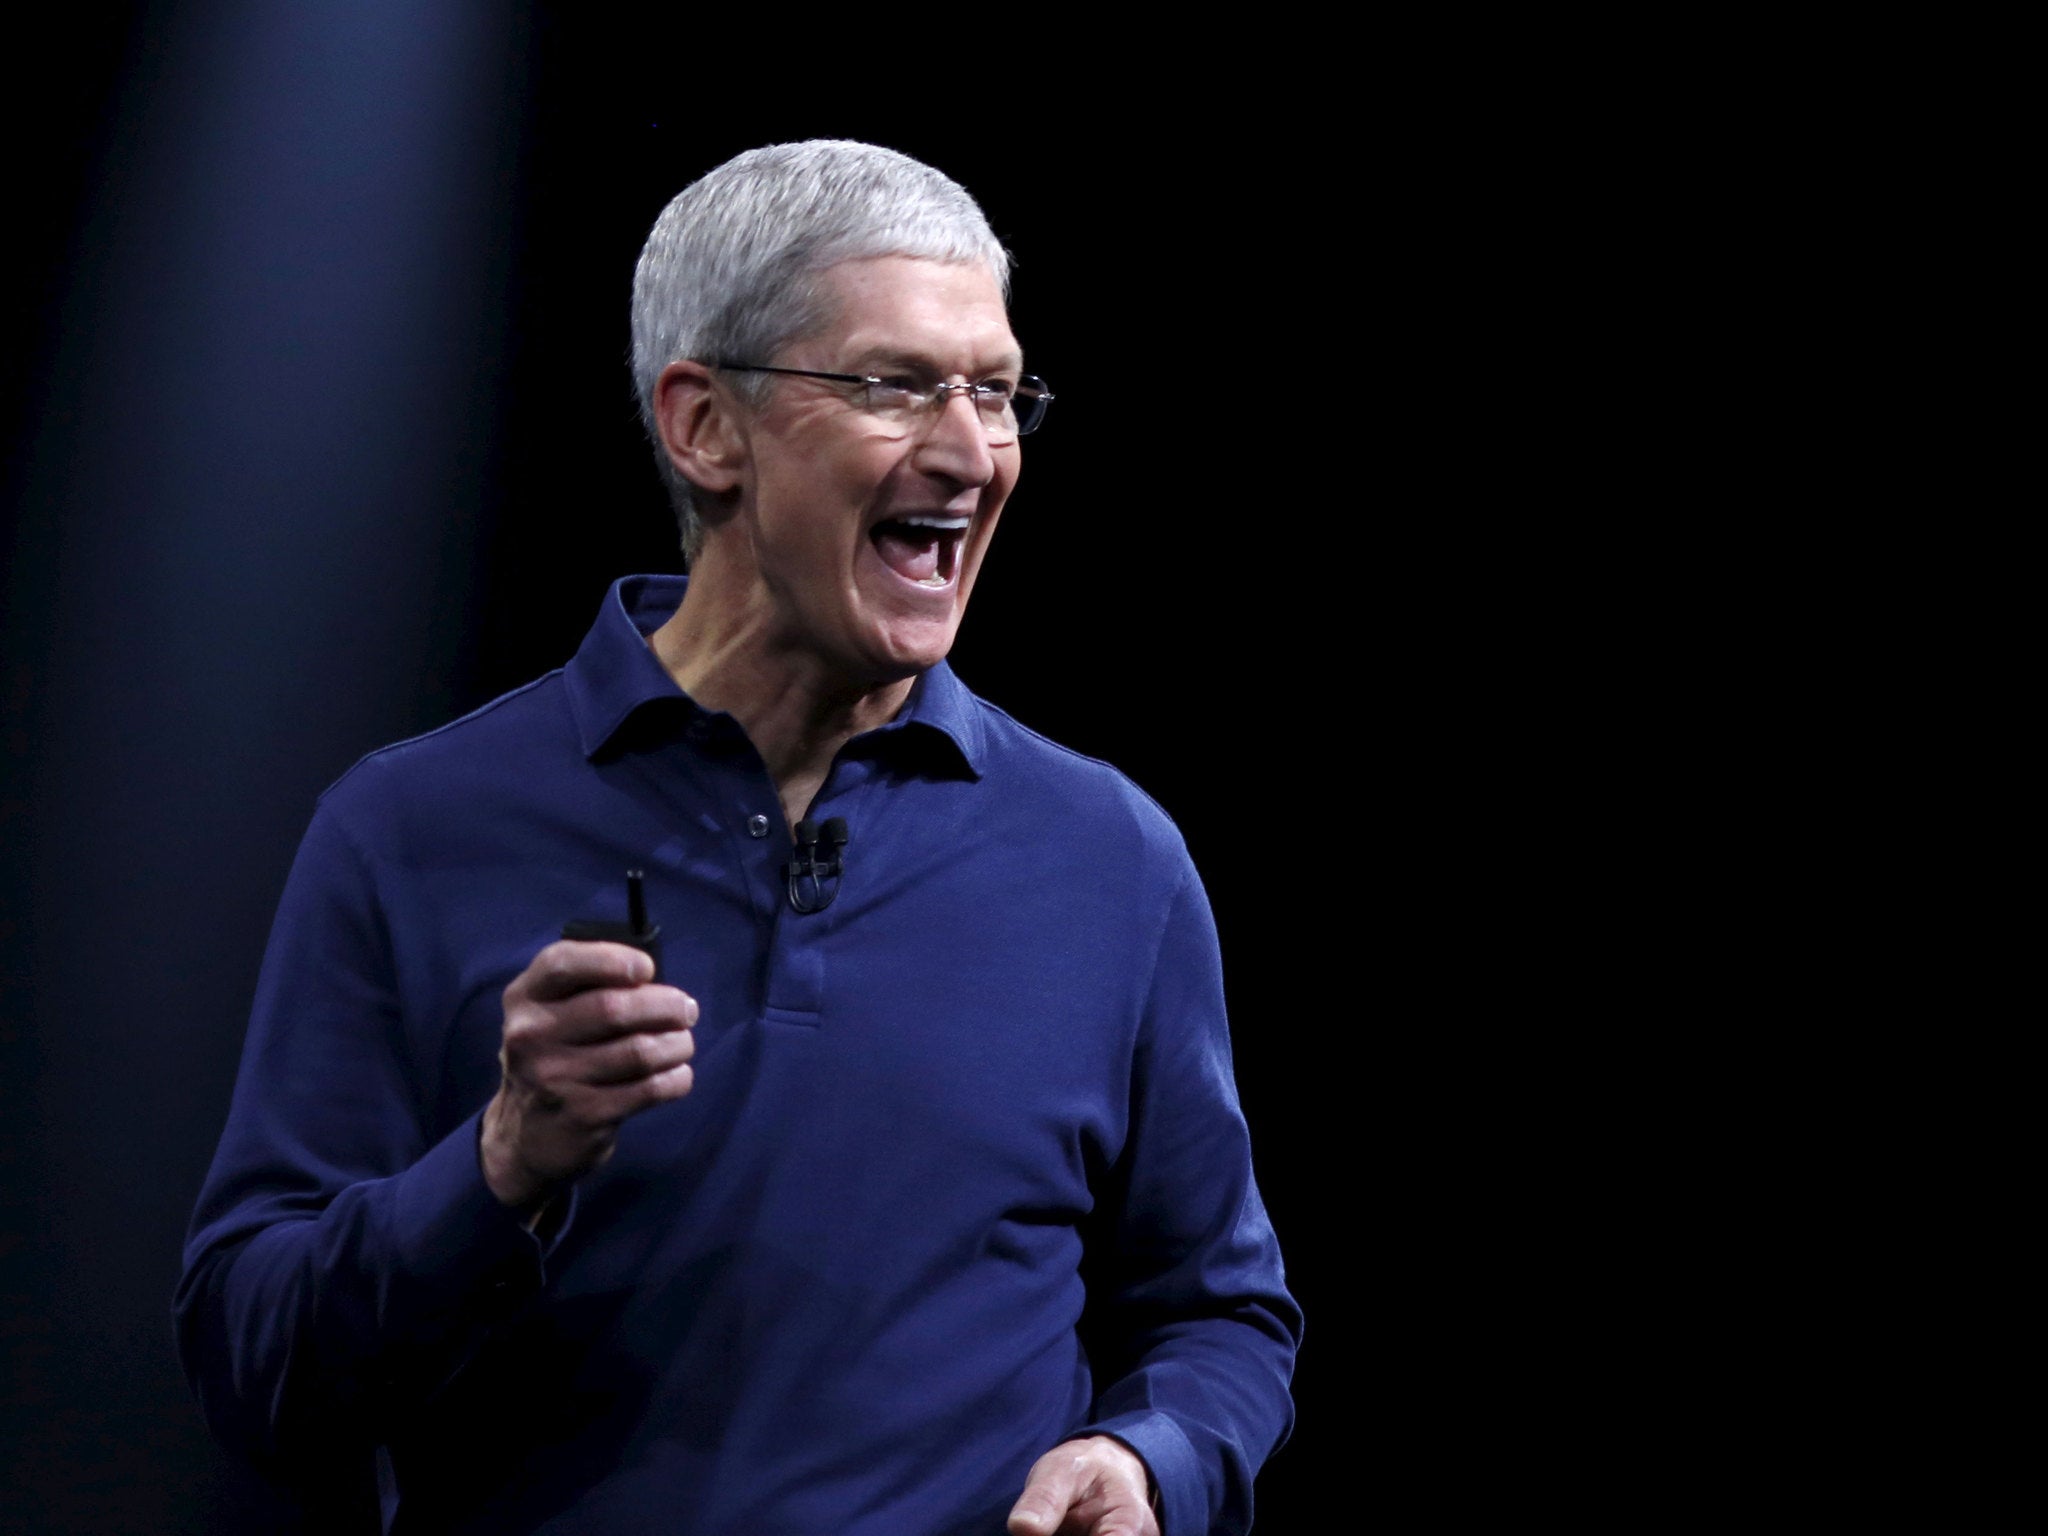 Apple CEO Tim Cook delivers his keynote address at the Worldwide Developers Conference in San Francisco, California June 8, 2015